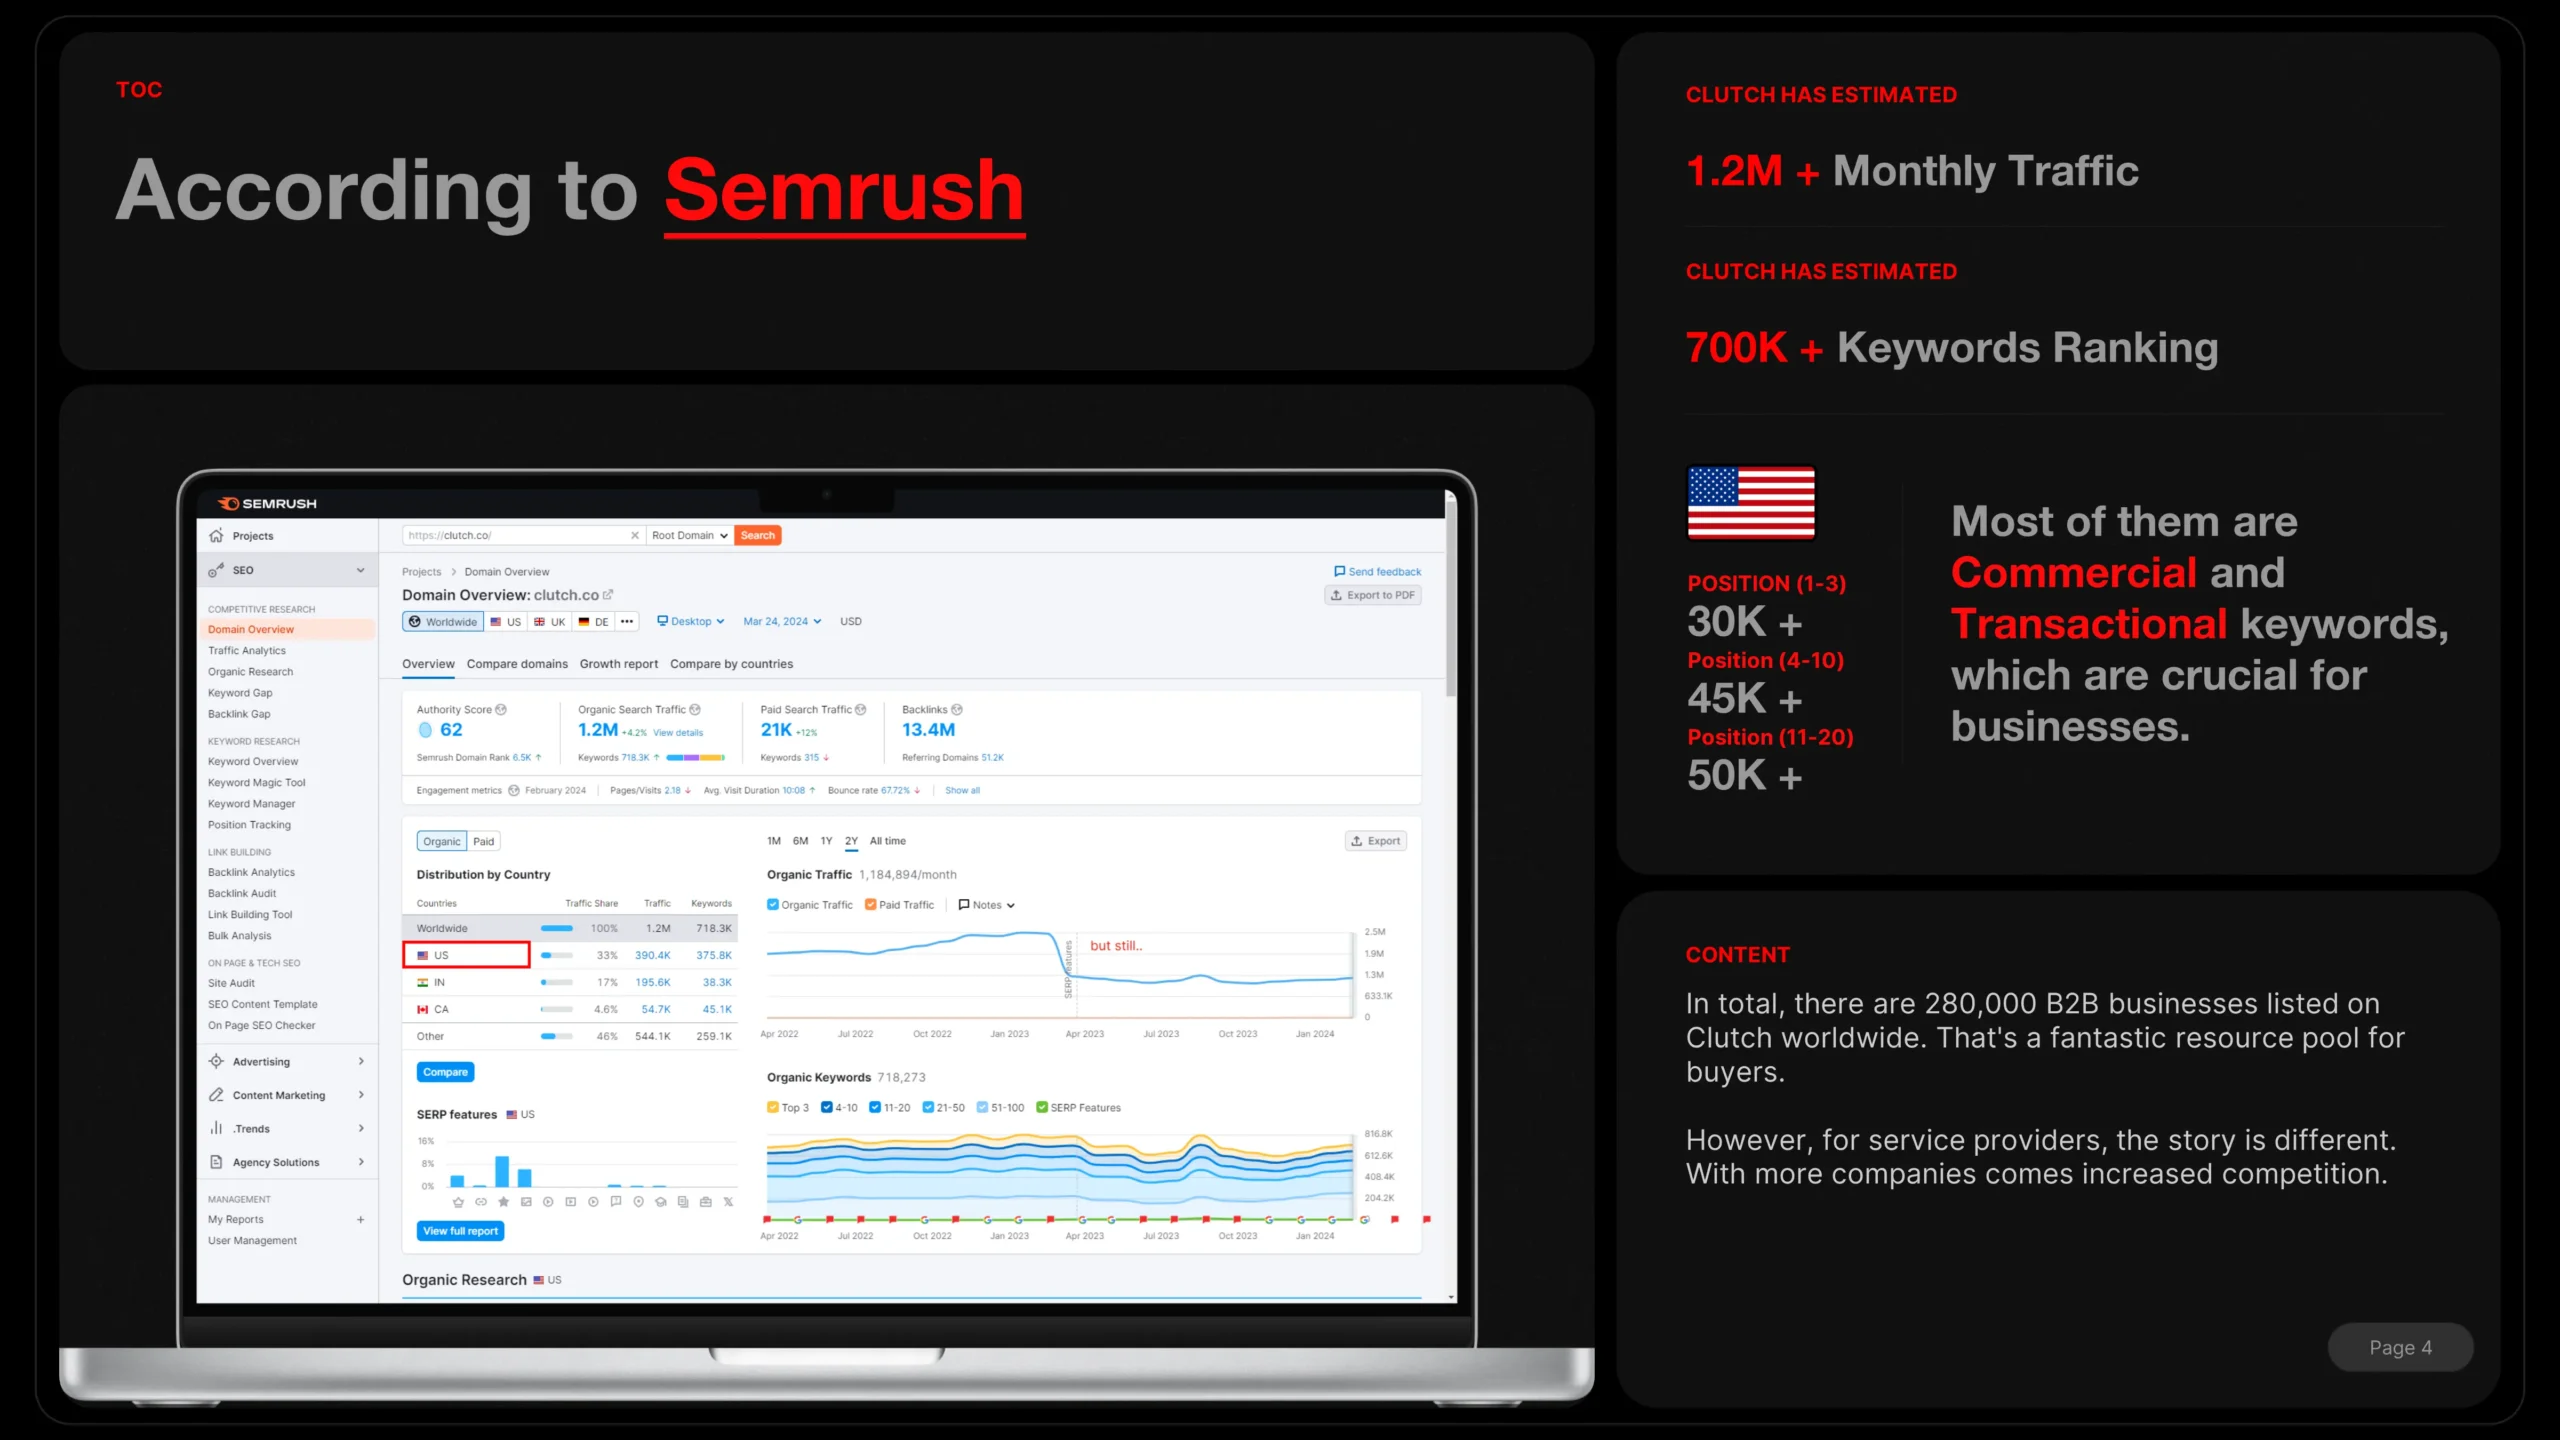 image representing Clutch monthly traffic and keywords data according to Semrush with screenshot